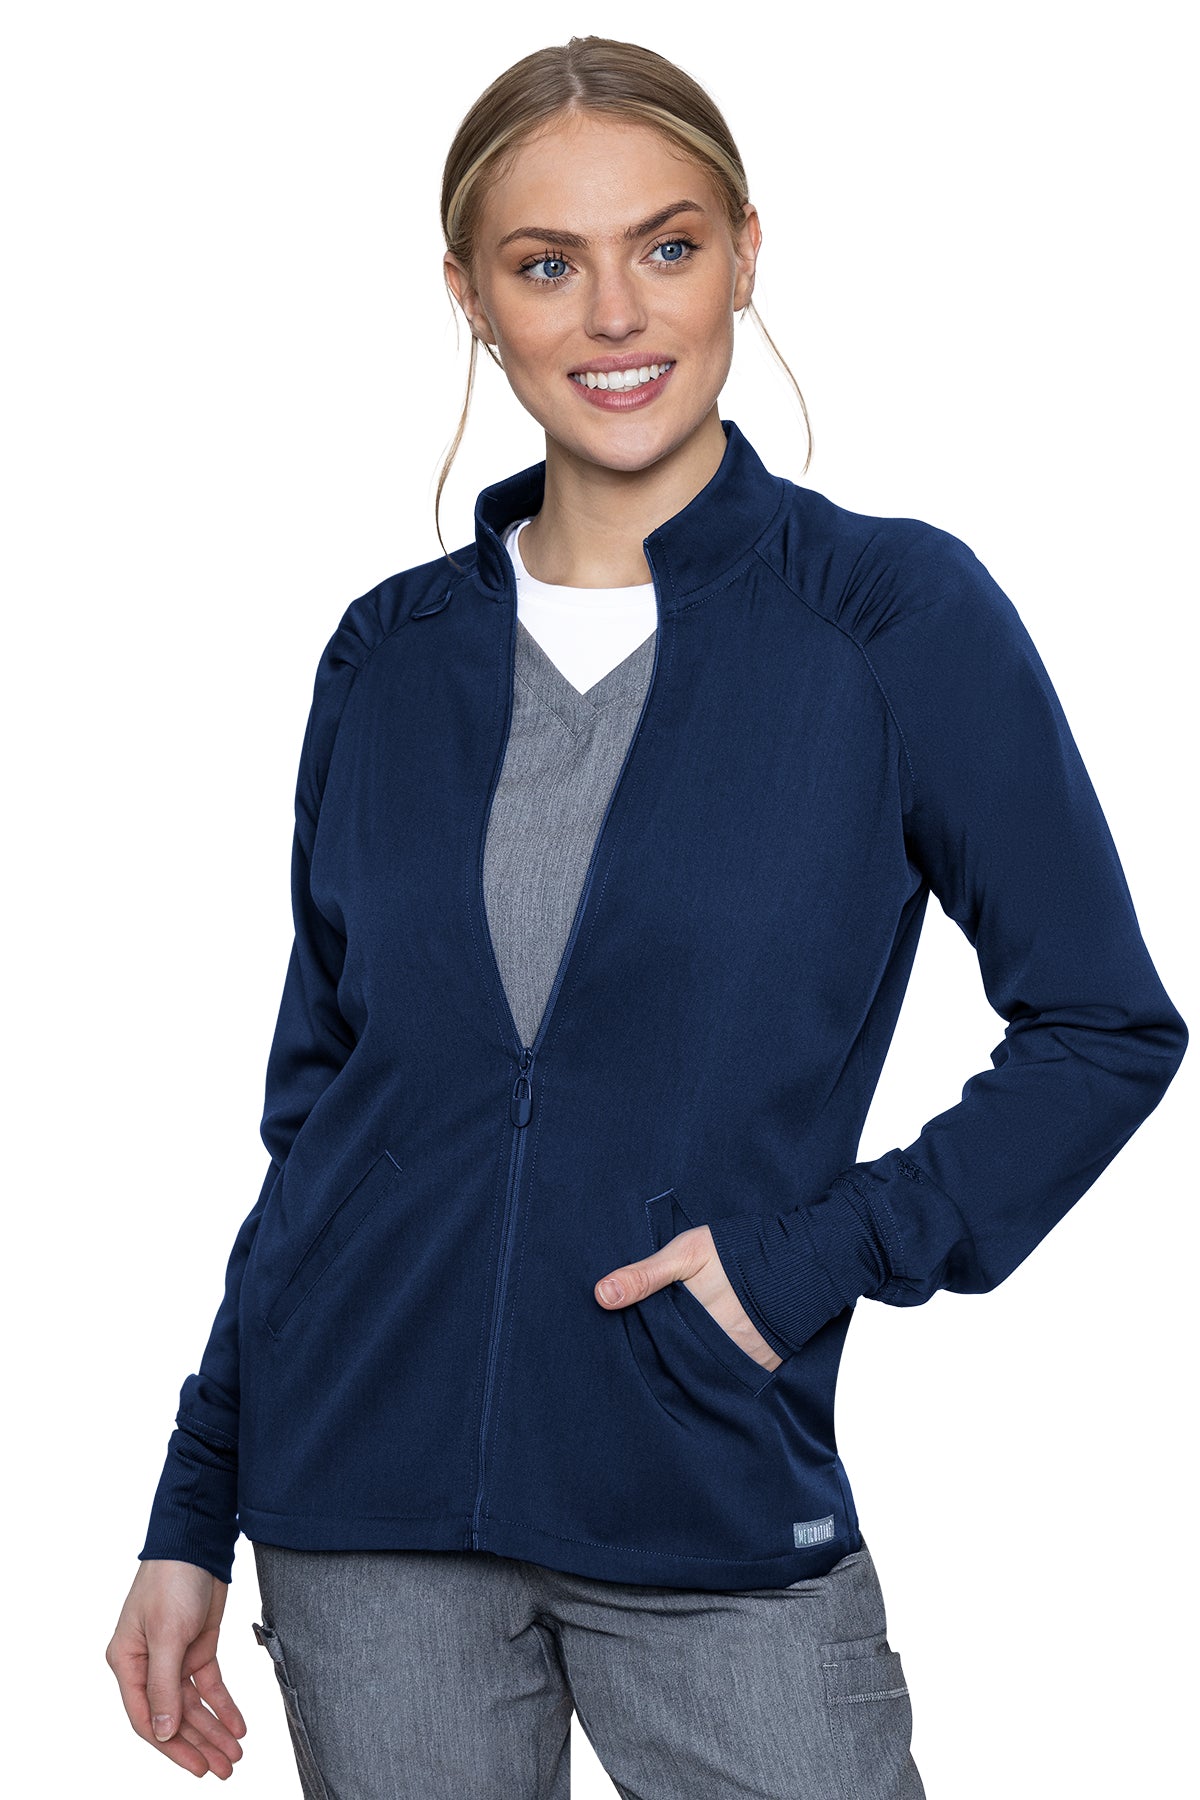 Med Couture Scrub Jacket Touch Raglan Warmup in Navy at Parker's Clothing and Shoes.